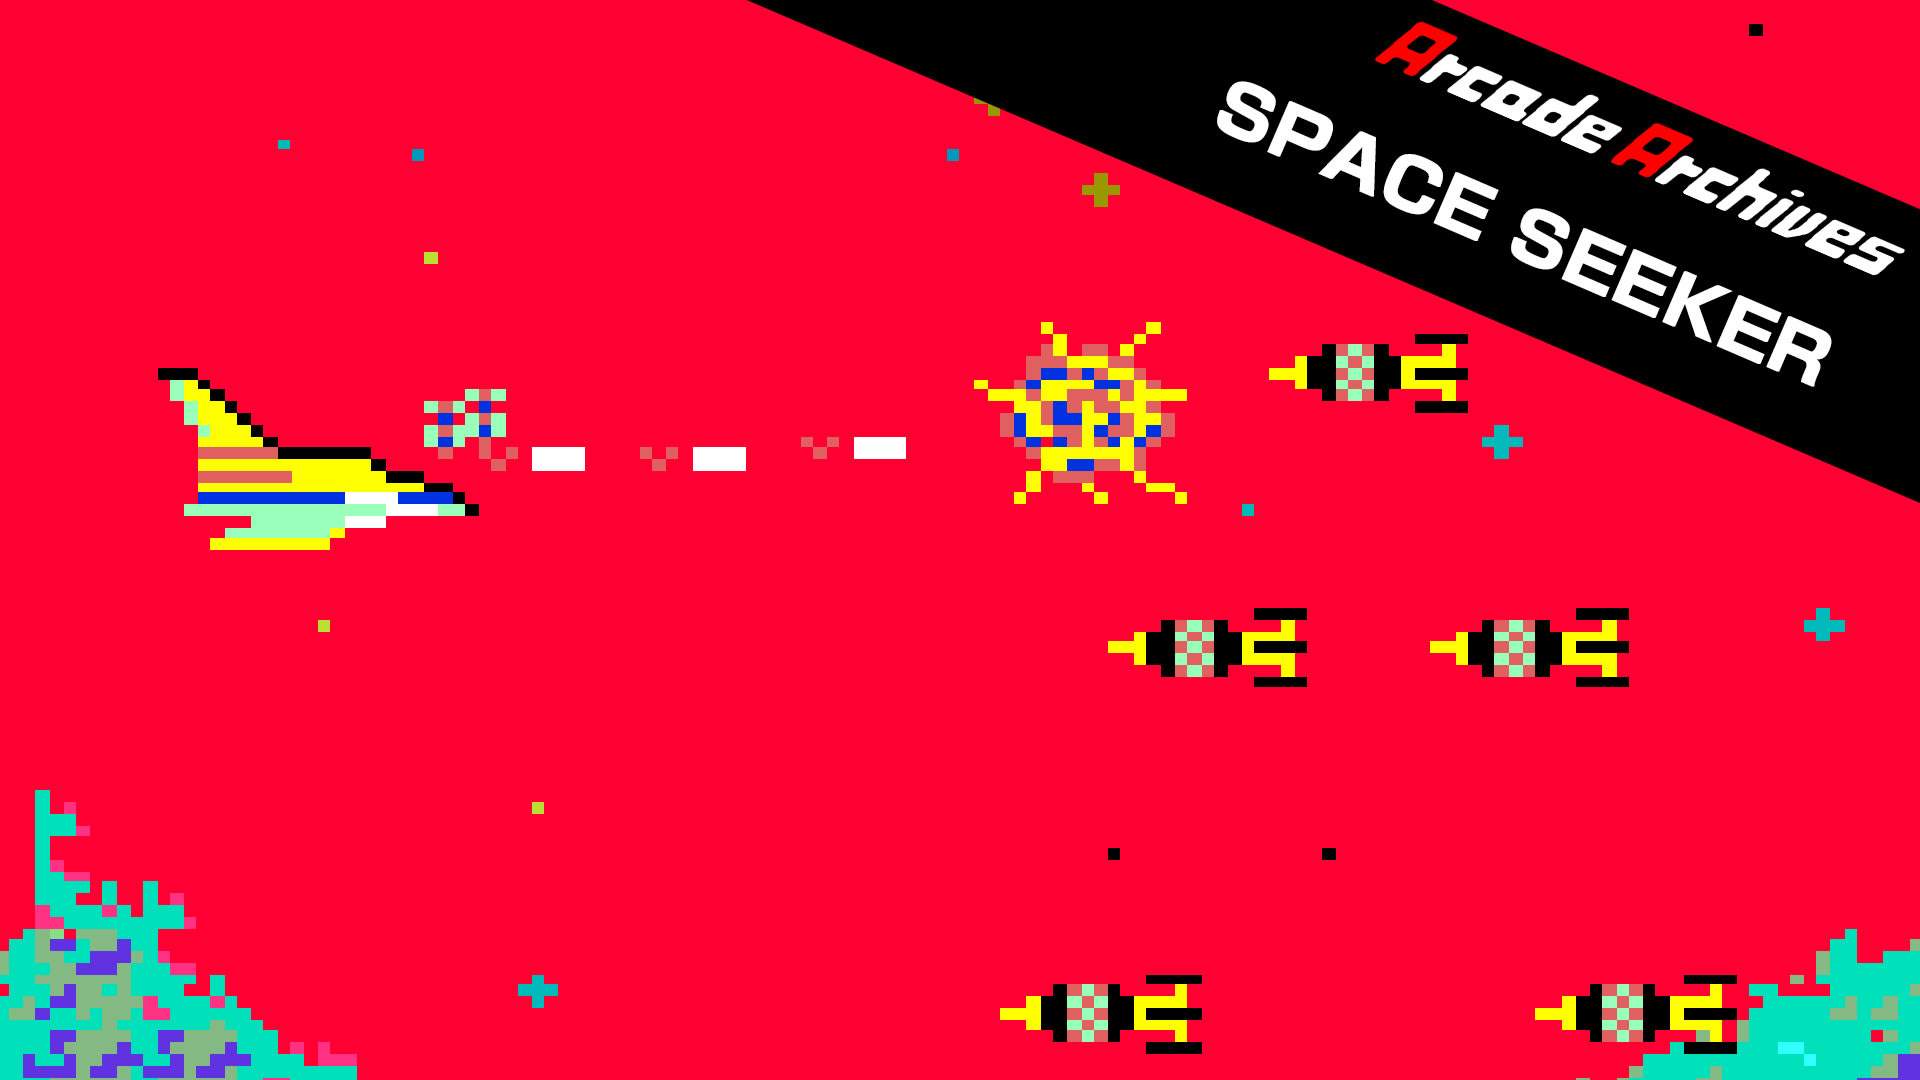 Arcade Archives SPACE SEEKER